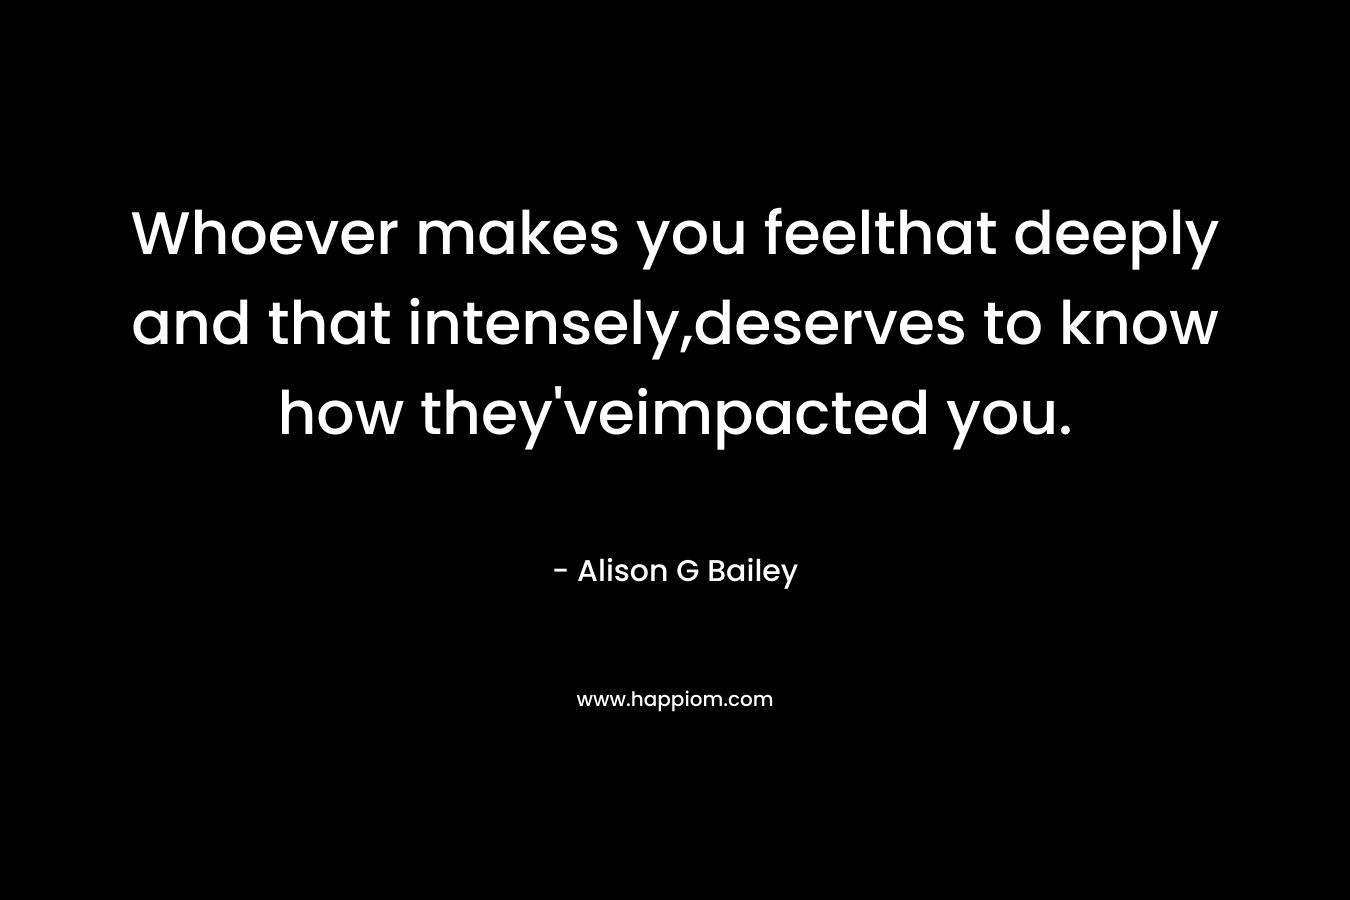 Whoever makes you feelthat deeply and that intensely,deserves to know how they'veimpacted you.